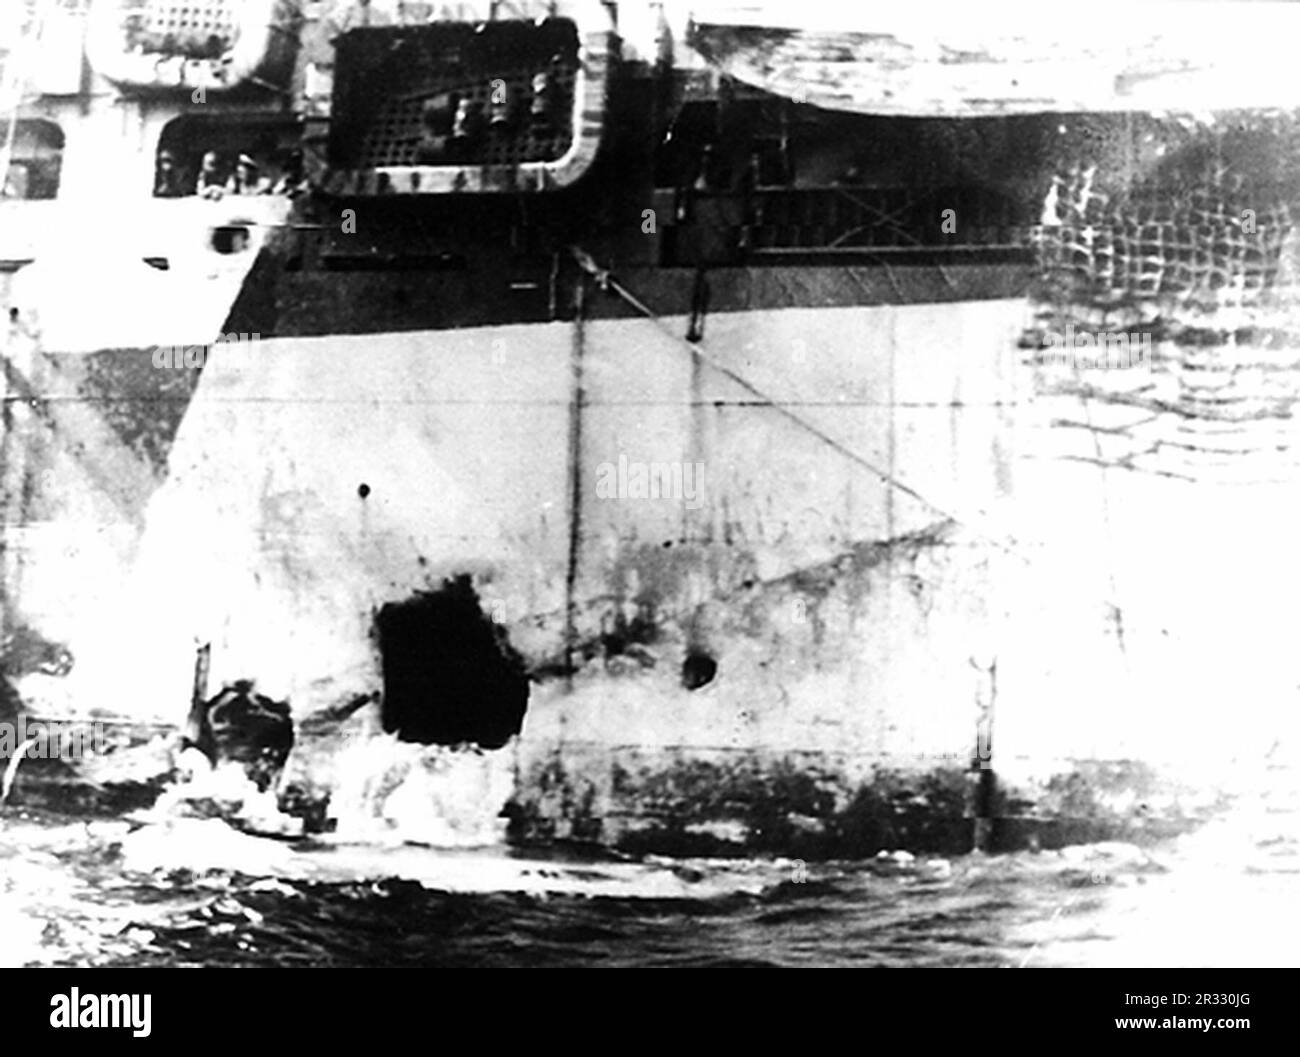 View of the kamikaze damage of the U.S. Navy attack transport USS Hinsdale (APA-120). She was hit by a Kawasaki Ki-61 off Okinawa, Japan, on 1 April 1945. The hole visible is on the port side amidships. When Japan was facing defeat in late 1944 it chose to destroy US ships with suicide bombings, known as Kamikaze.These attacks were a potent physical and psychological weapon and sunk a total of 47 ships at a cost of more than 3000 pilots and planes. By late 1944 the US Navy was large enough that the losses were insignificant and they did not alter the course of the war. Stock Photo